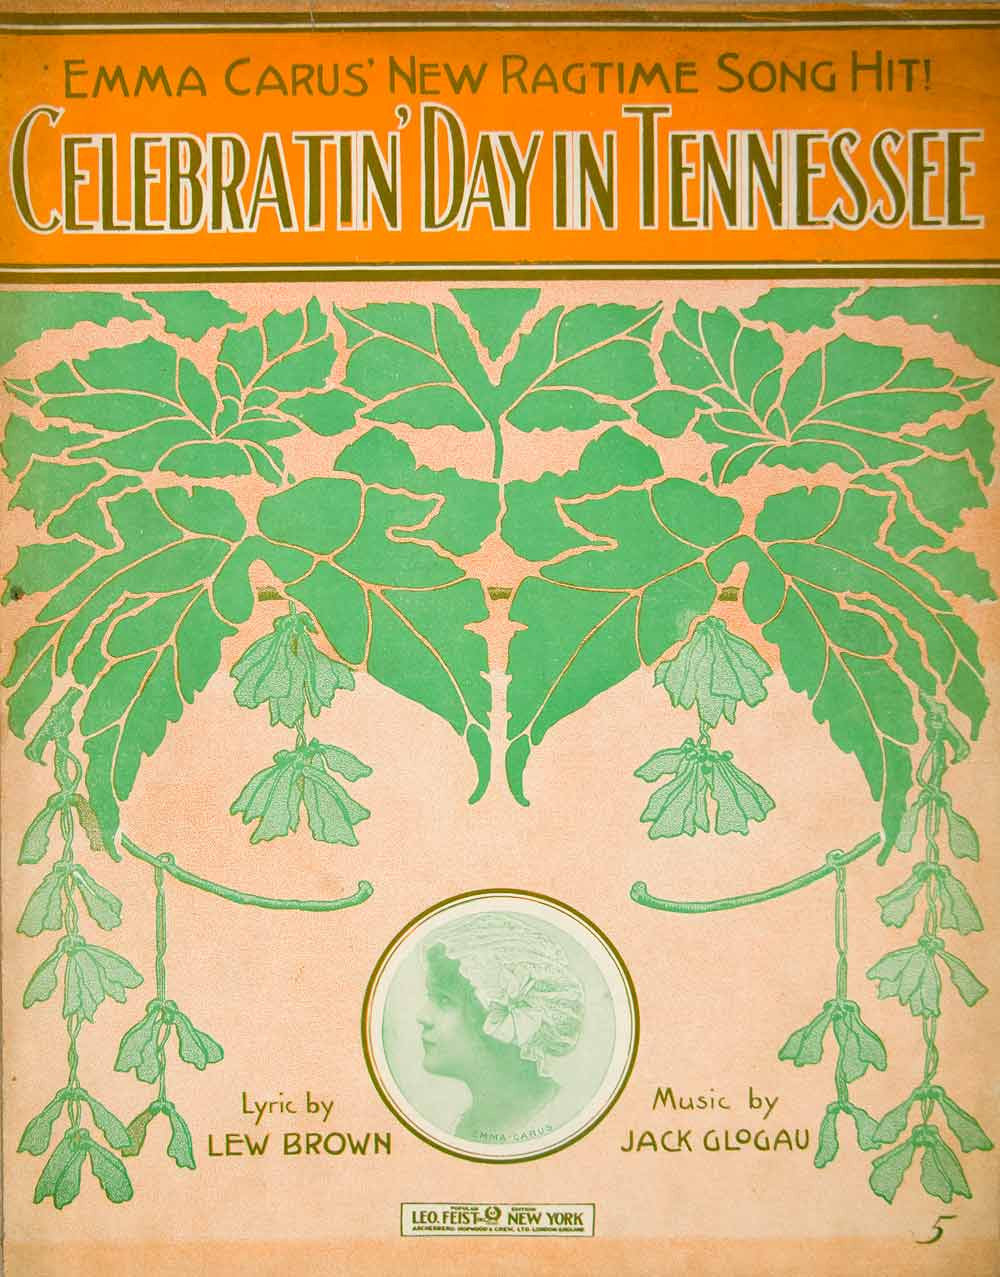 1914 Sheet Music Celebratin' Day Tennessee Sycamore Leaf Lew Brown Jack SM3 - Period Paper
